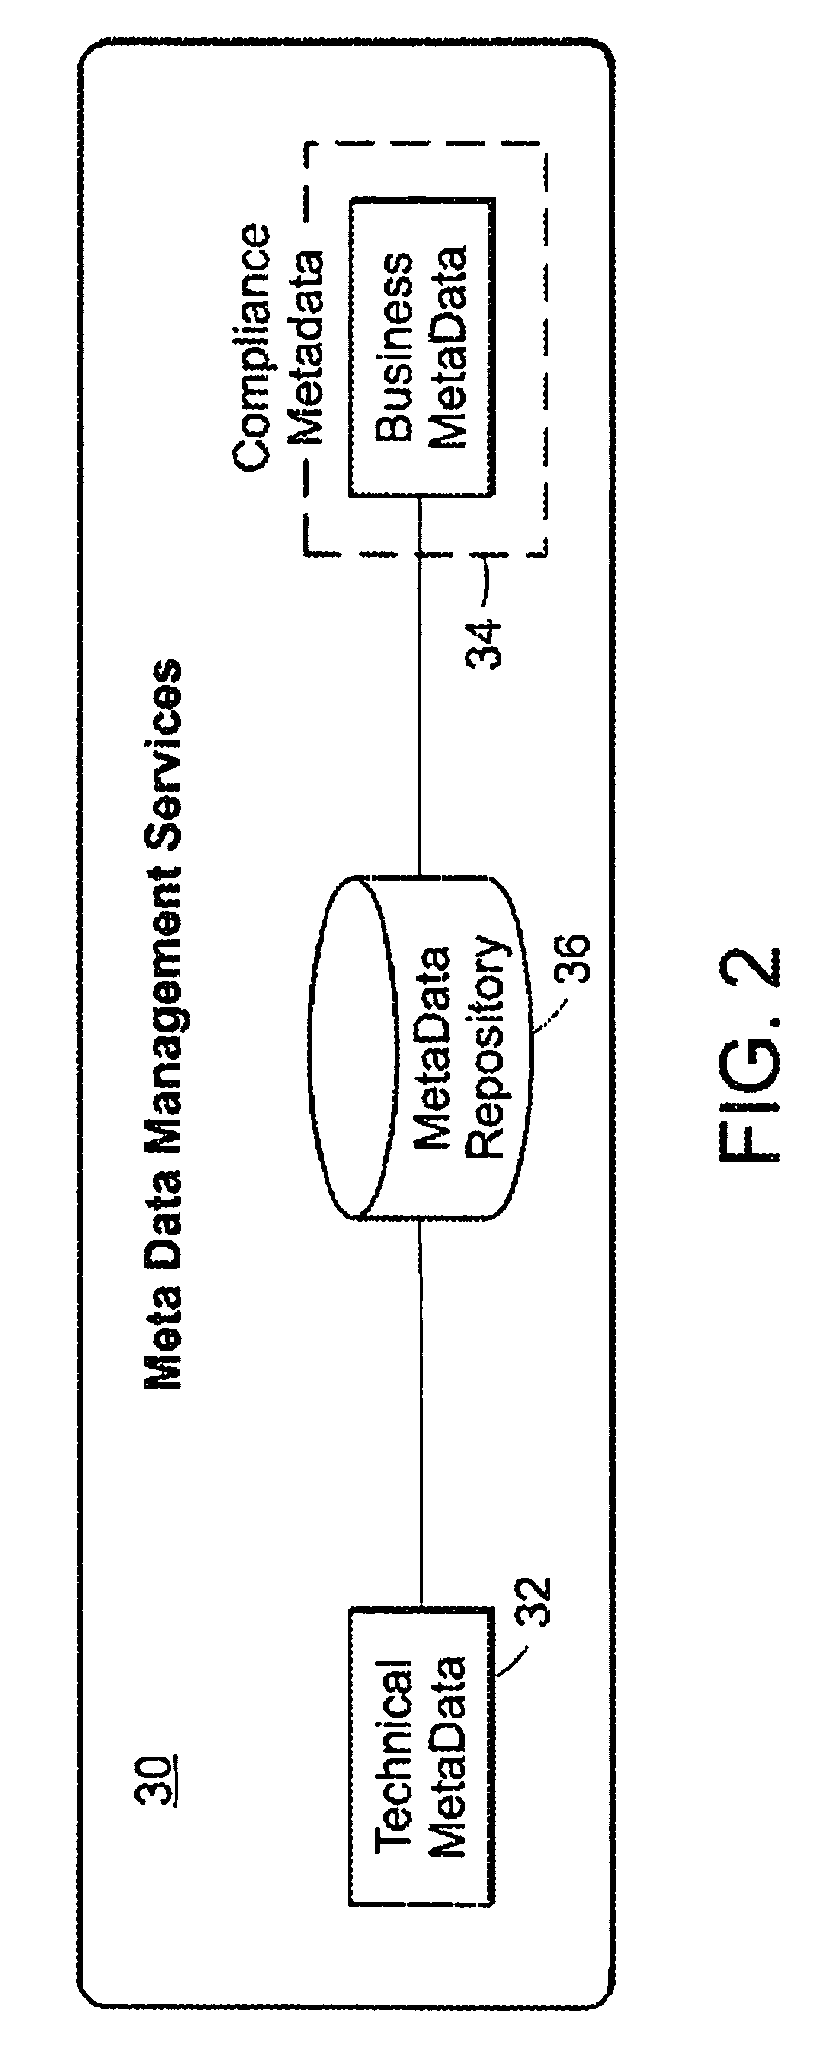 System and method for automating ETL applications